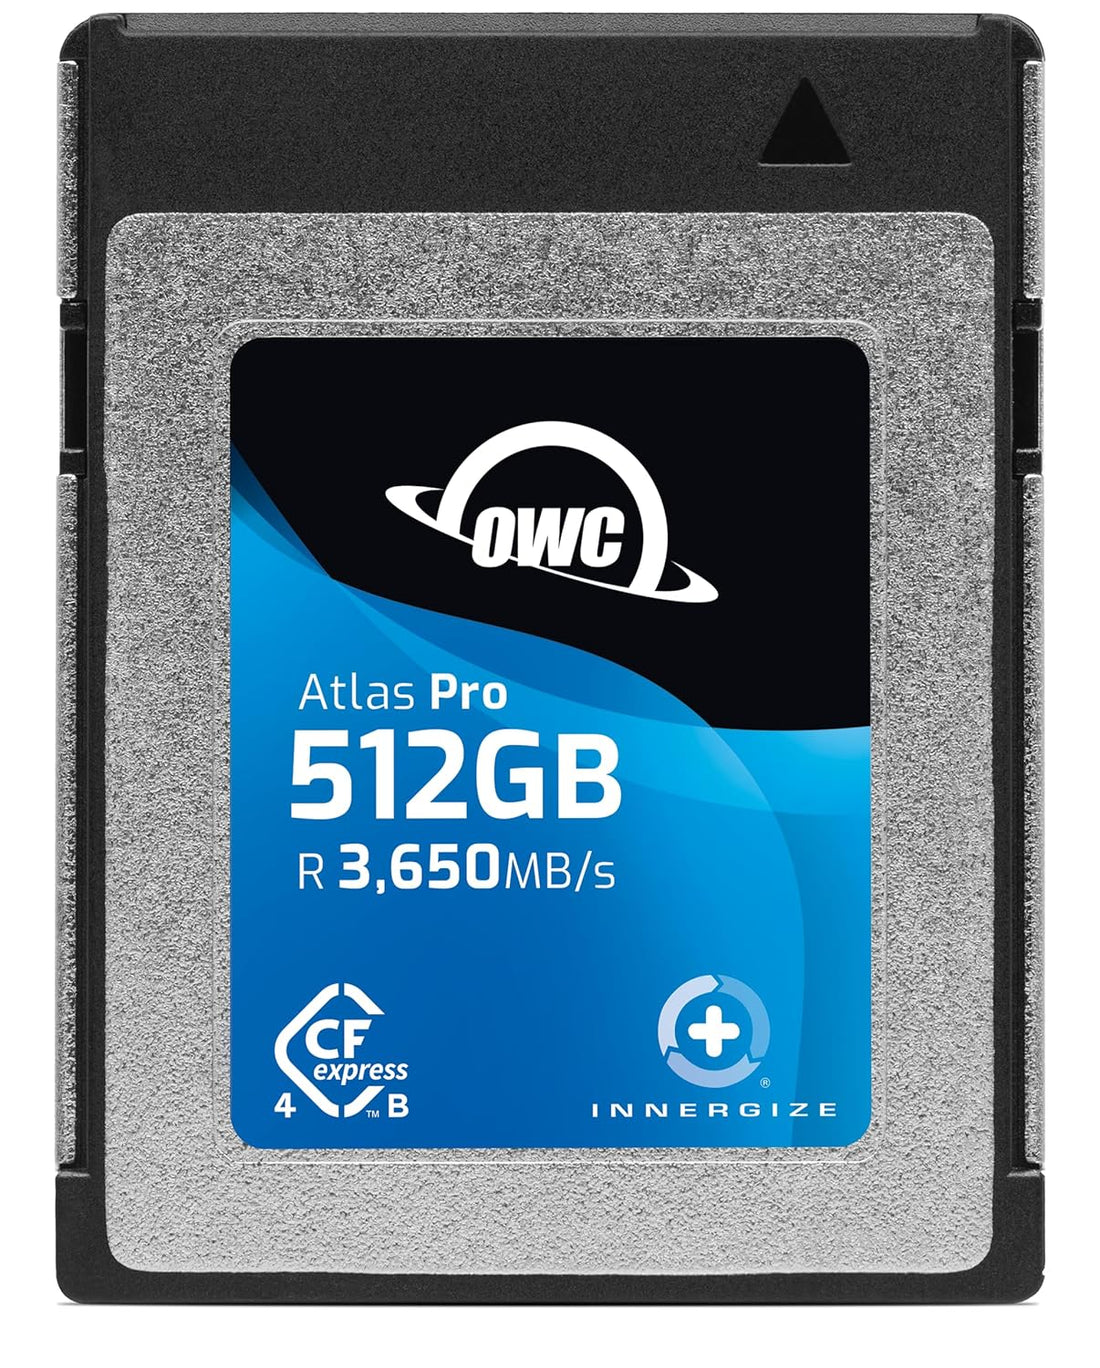 OWC 512GB Atlas Pro High-Performance CFexpress 4.0 Type B Memory Card, Professional Grade, up to 3000MB/s Write,3650MB/s Read, Capture up to 6K high bitrate Video